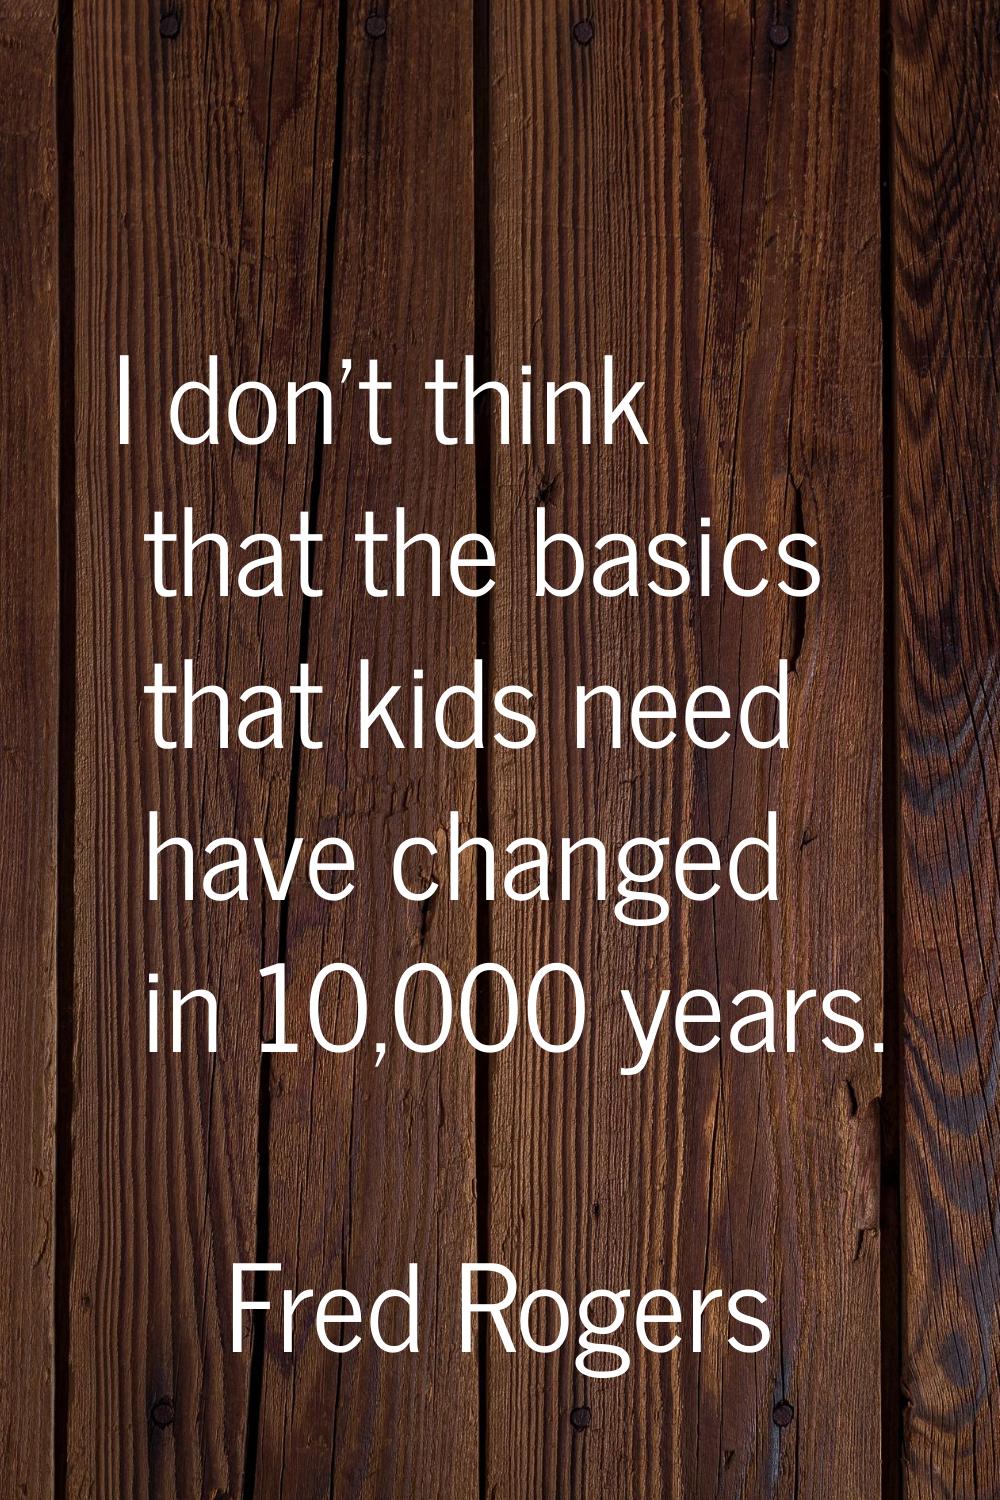 I don't think that the basics that kids need have changed in 10,000 years.